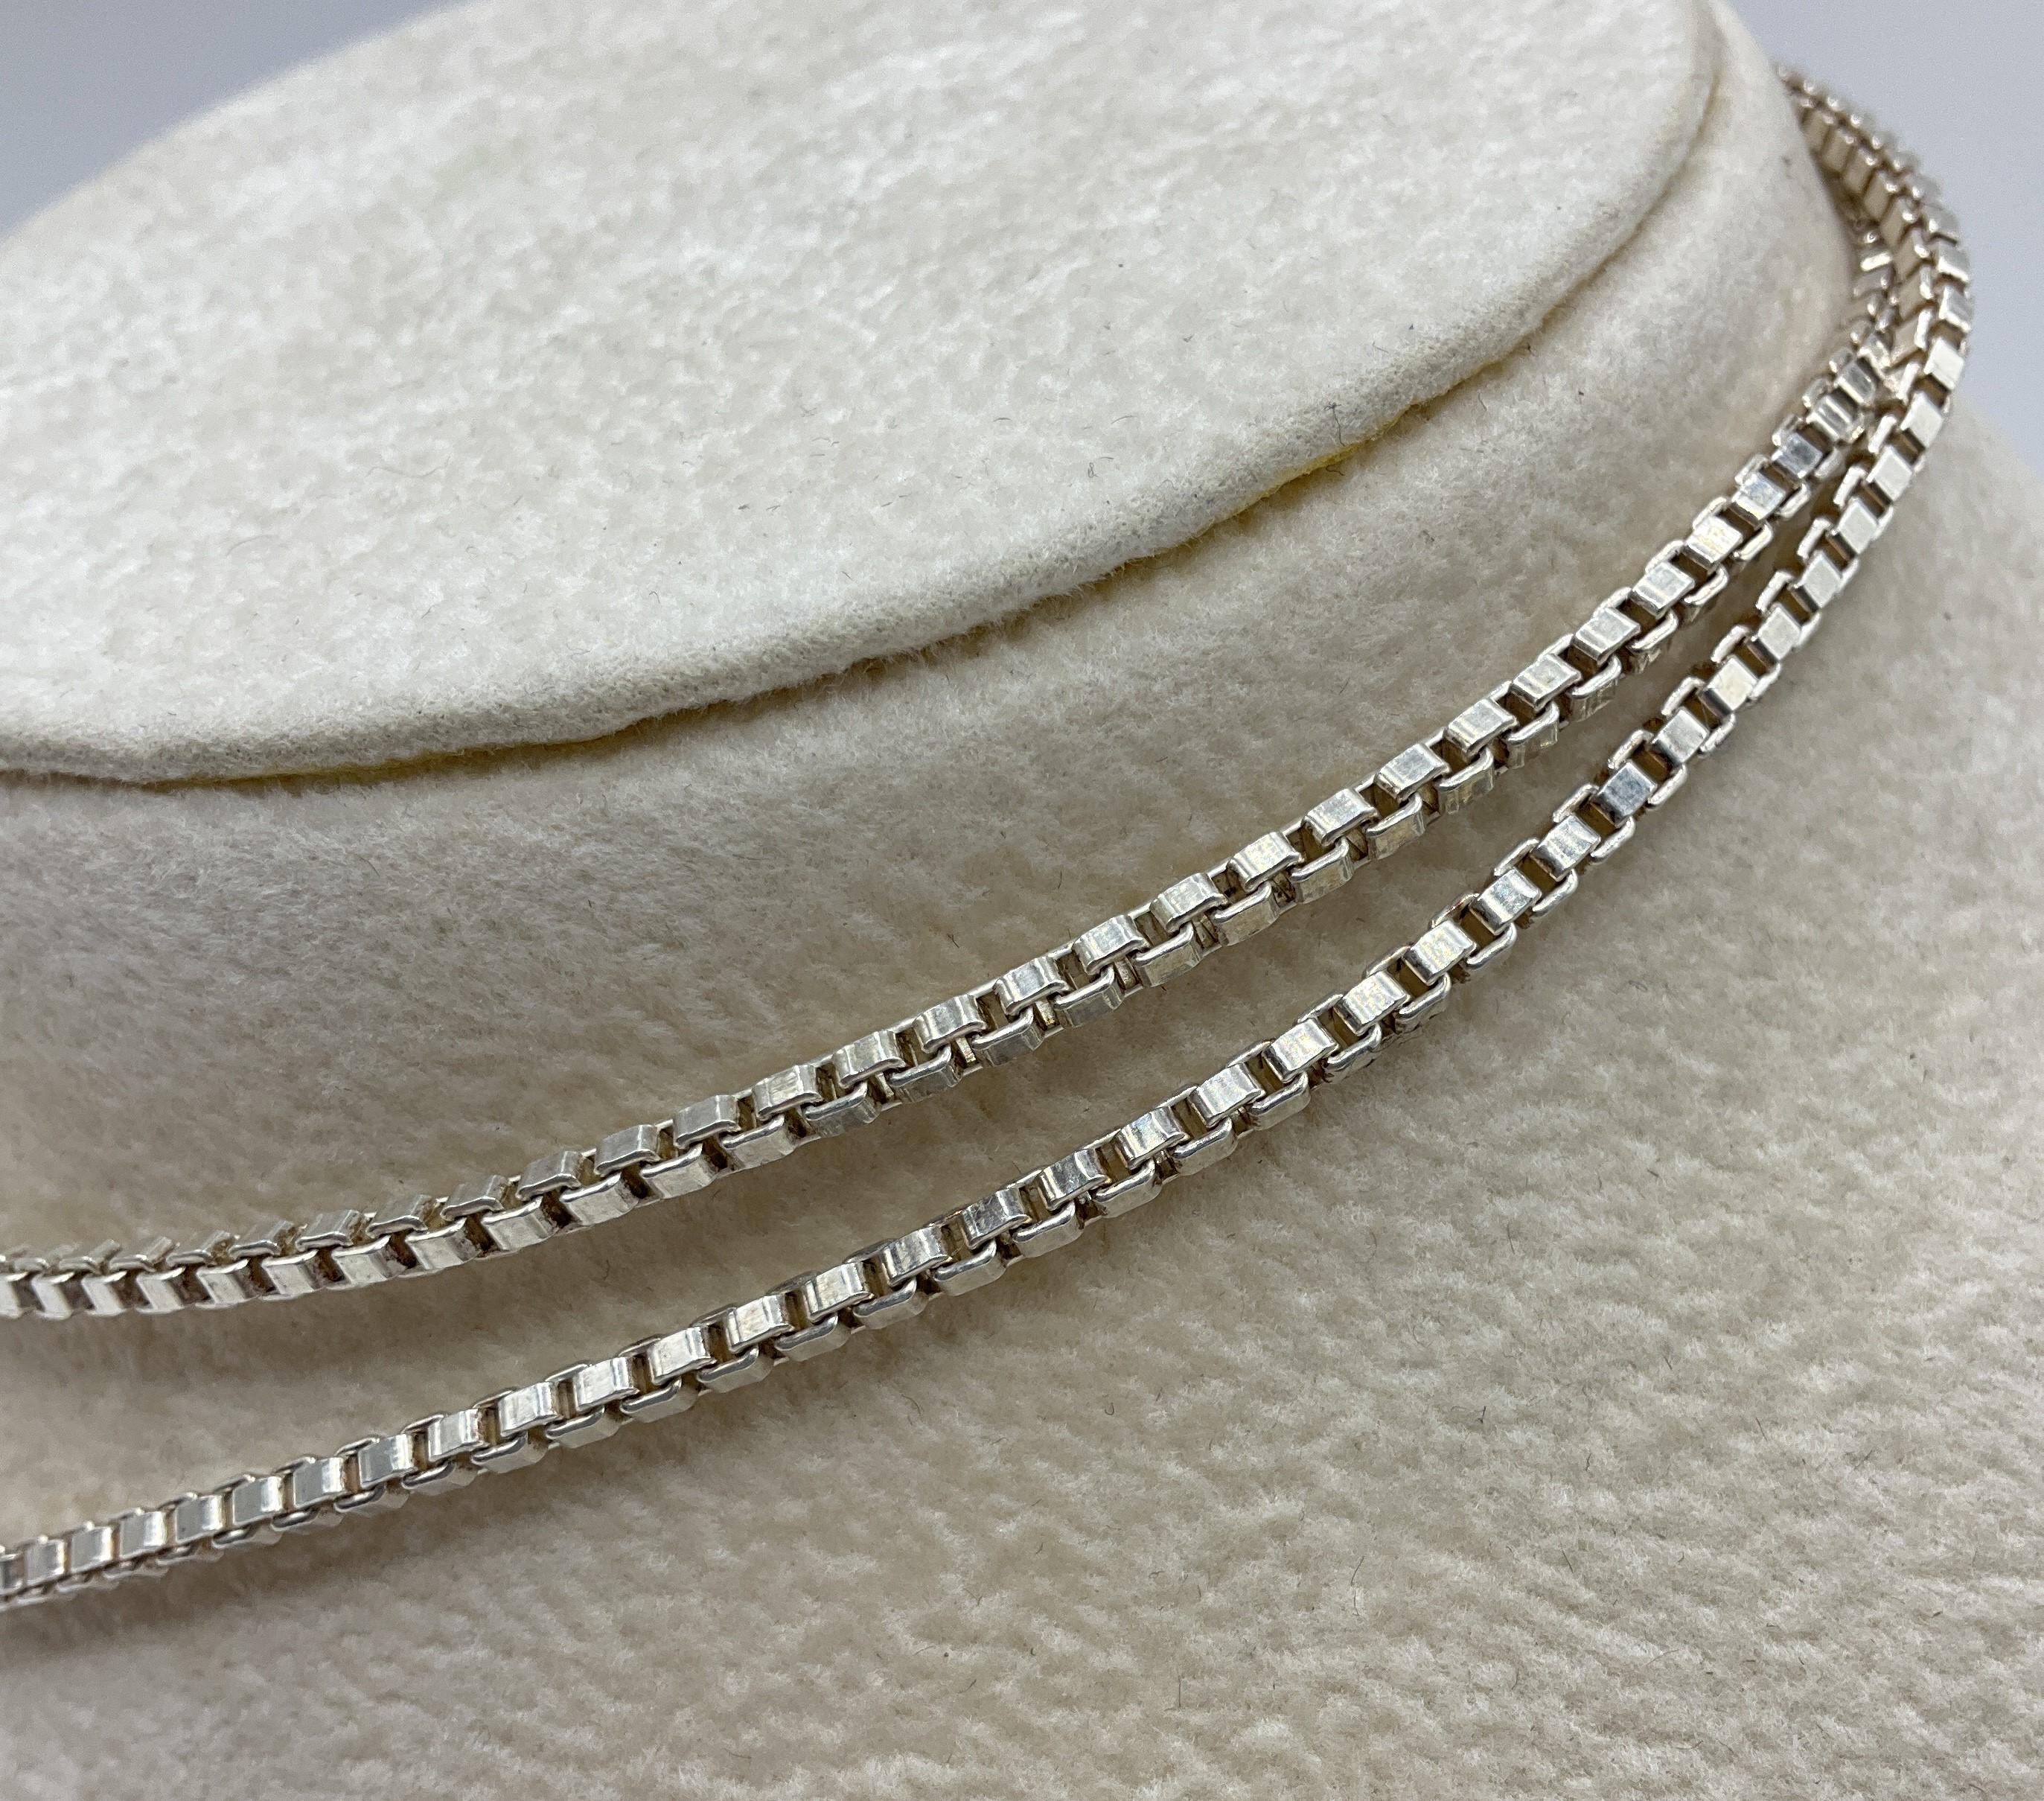 27.1g .925 Sterling Necklace 22"